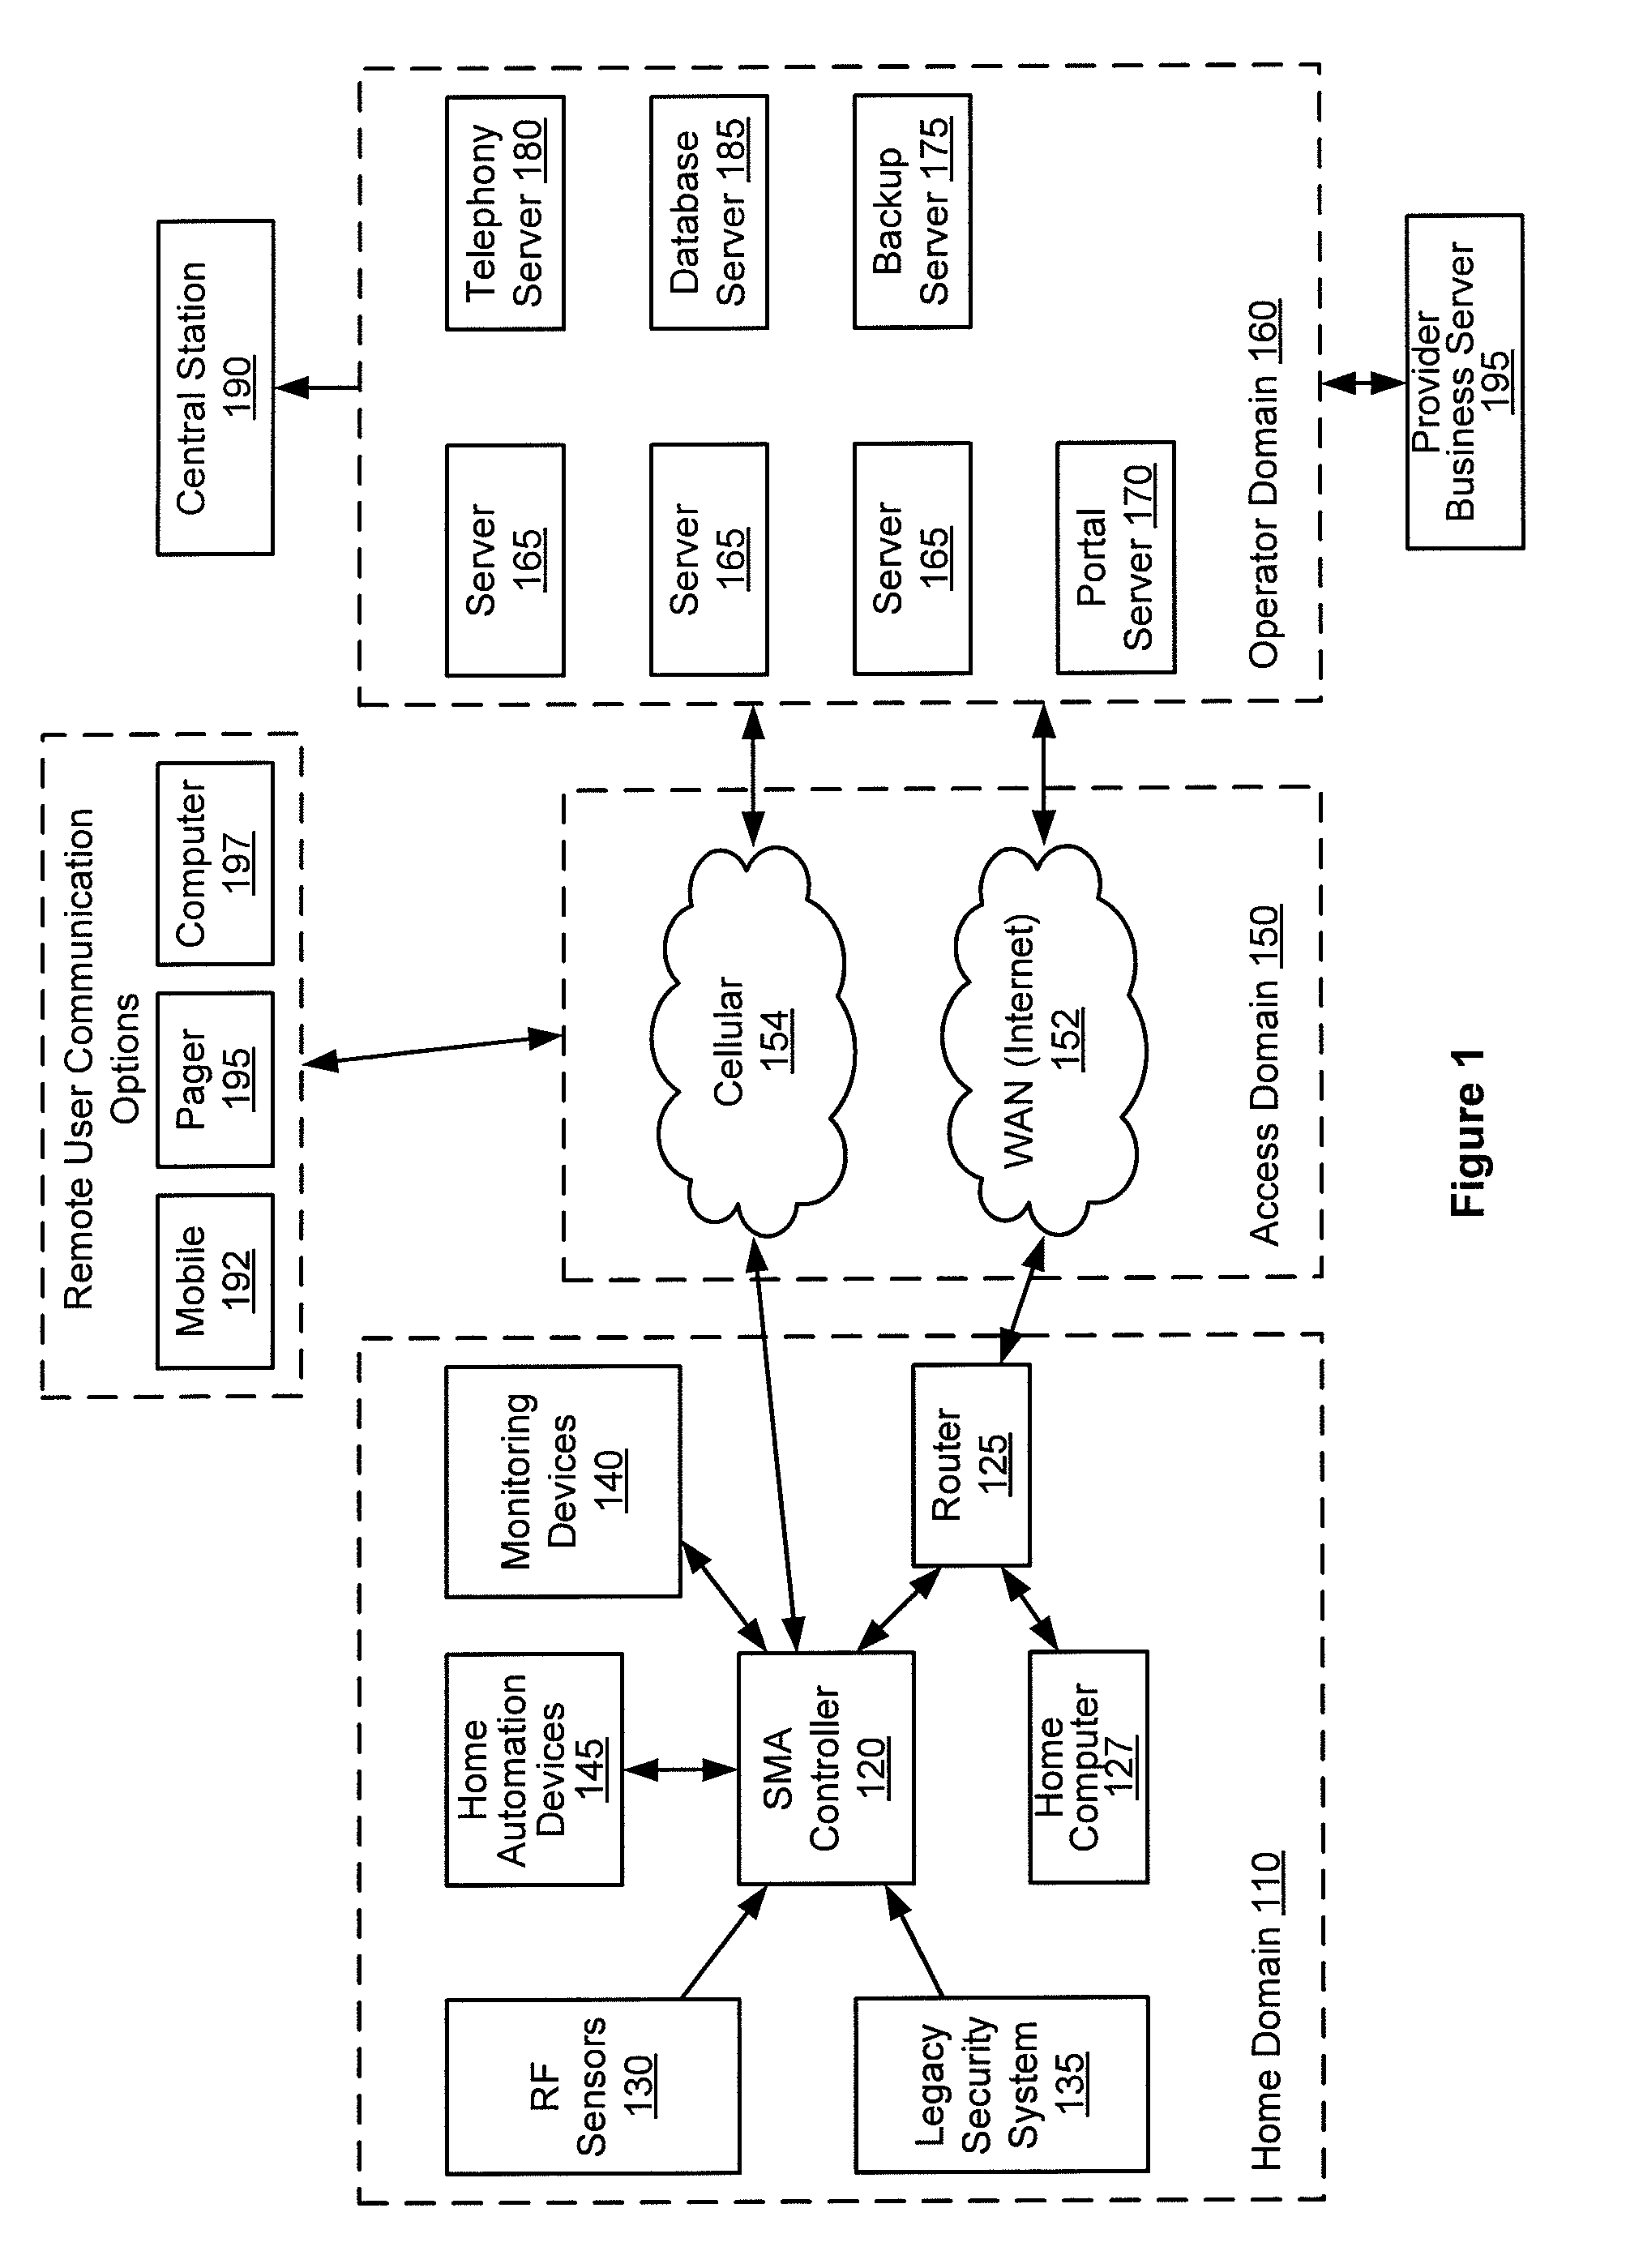 Method, system and apparatus for automated inventory reporting of security, monitoring and automation hardware and software at customer premises